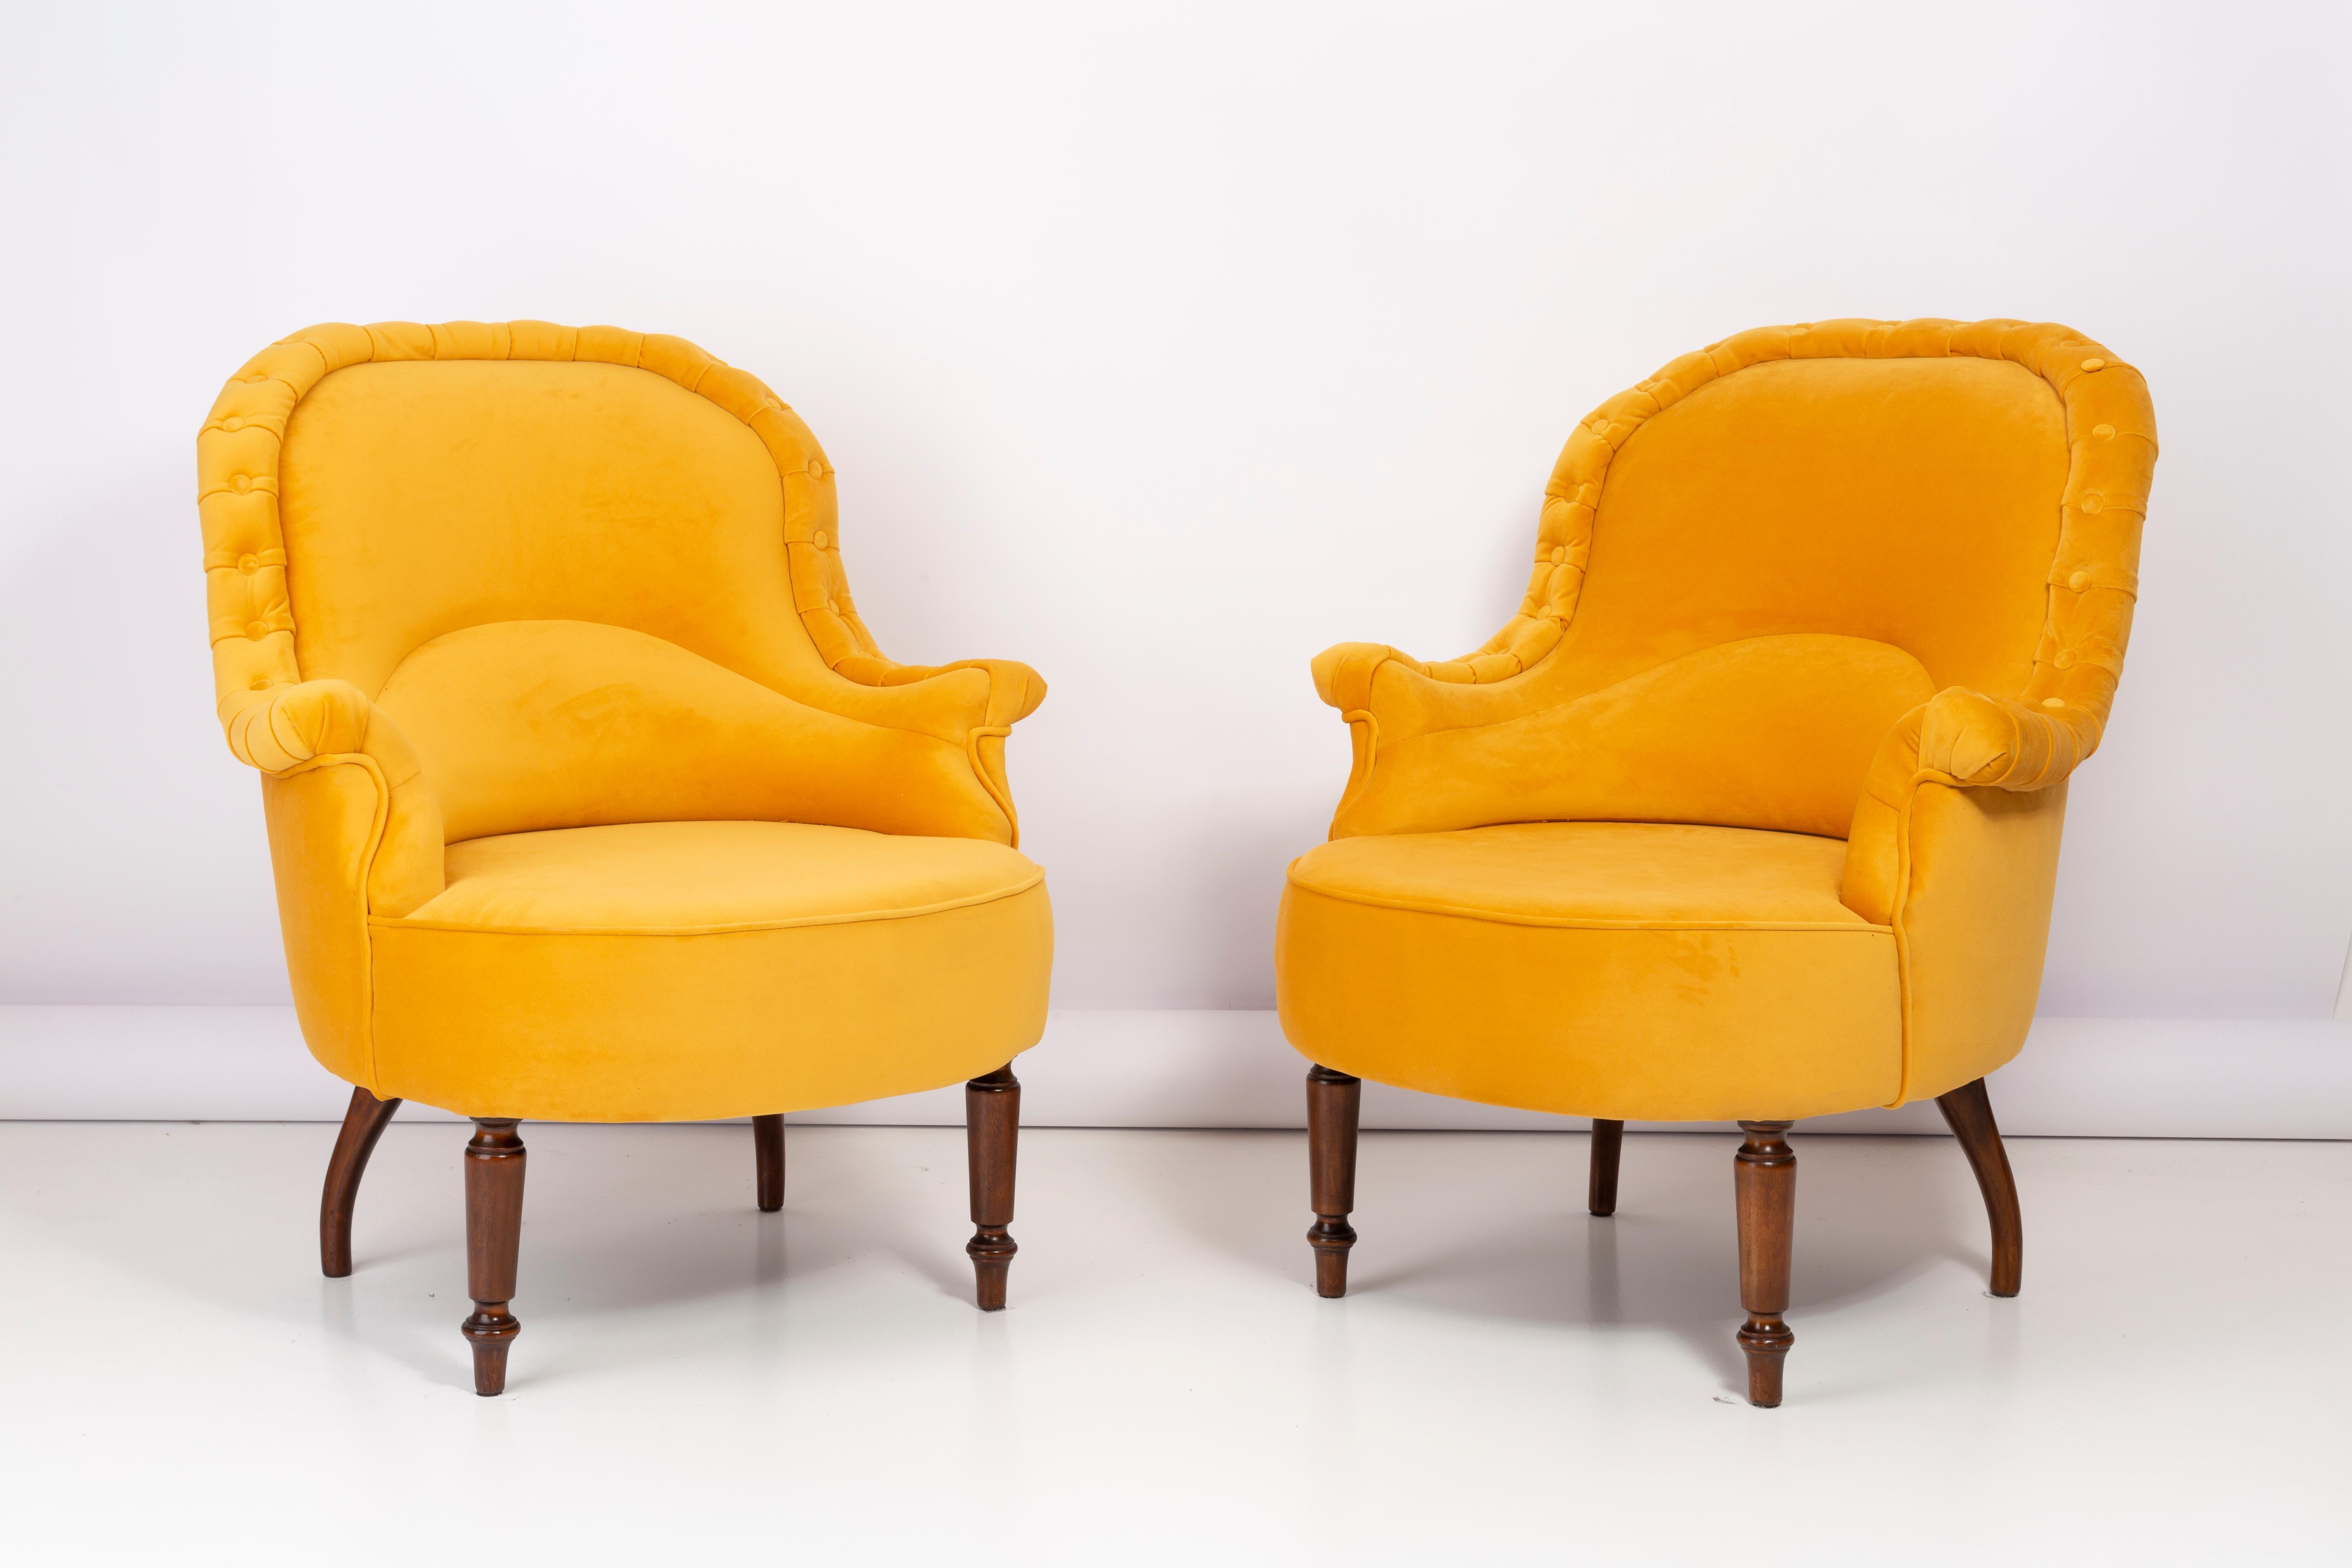 German armchairs produced in the 1930s in Berlin. The armchairs are after a thorough renovation of upholstery and carpentry. The wooden legs are thoroughly cleaned and covered with a semi-matte varnish in the color of a nut. The upholstery is made